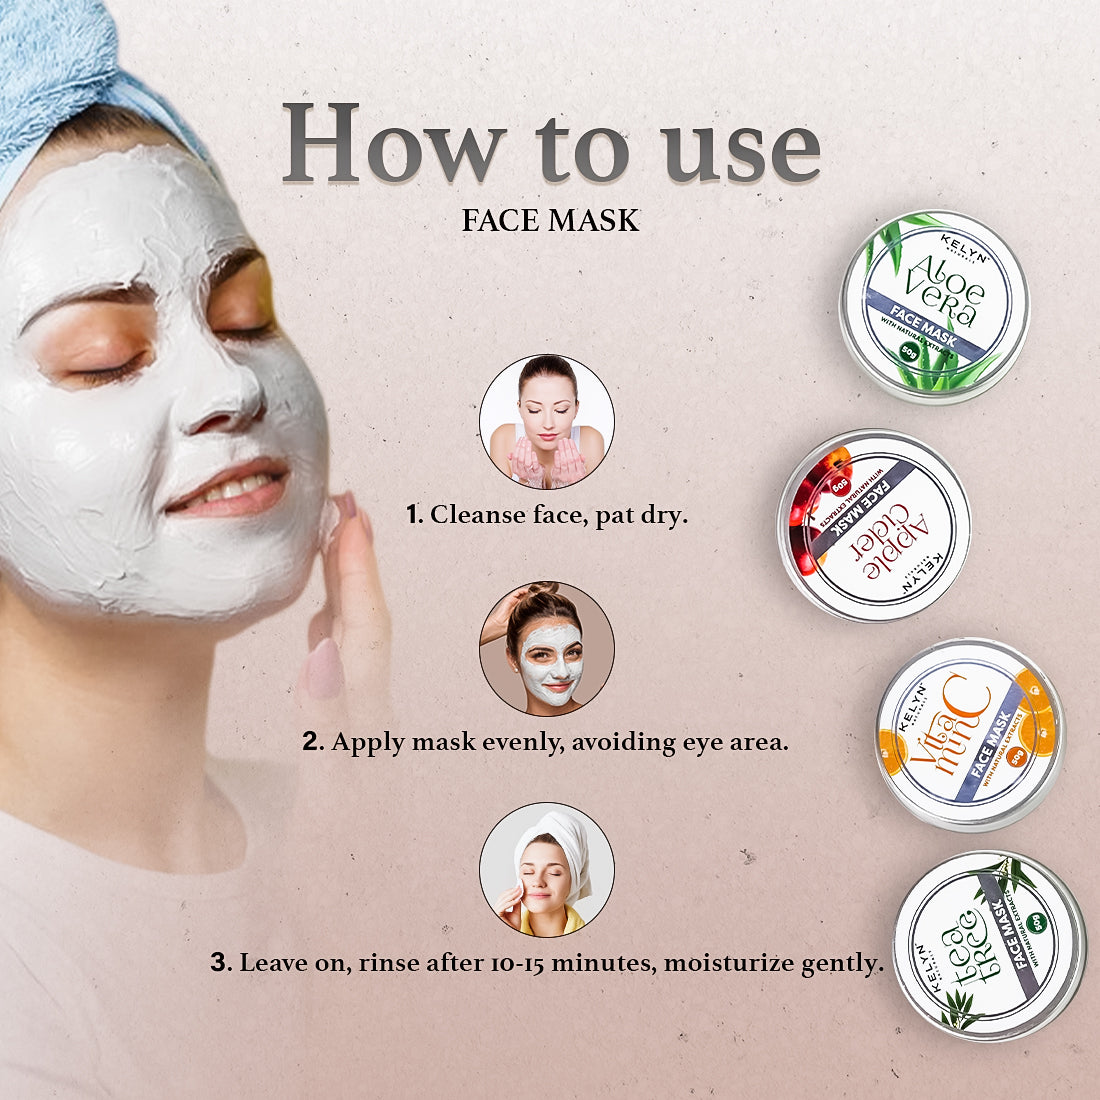 Apple Cider Face Mask with Natural Extracts – 50g